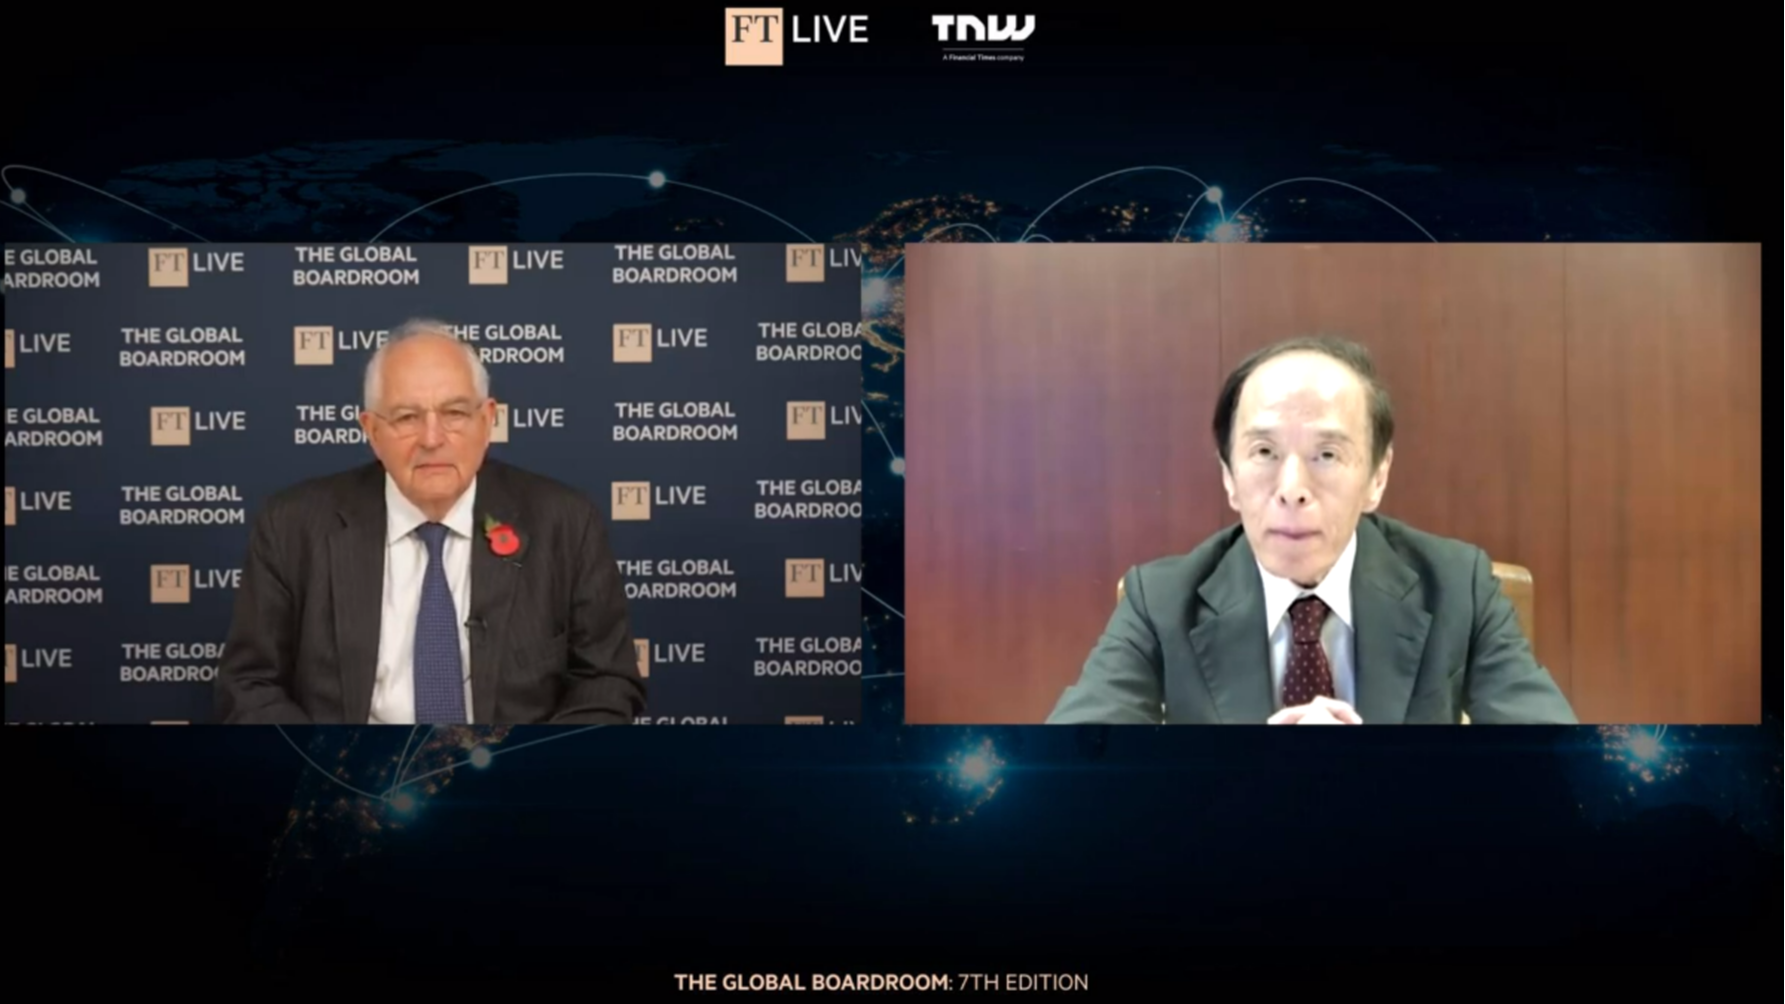 A video call featuring the FT’s Martin Wolf on the left and Kazuo Ueda on the right